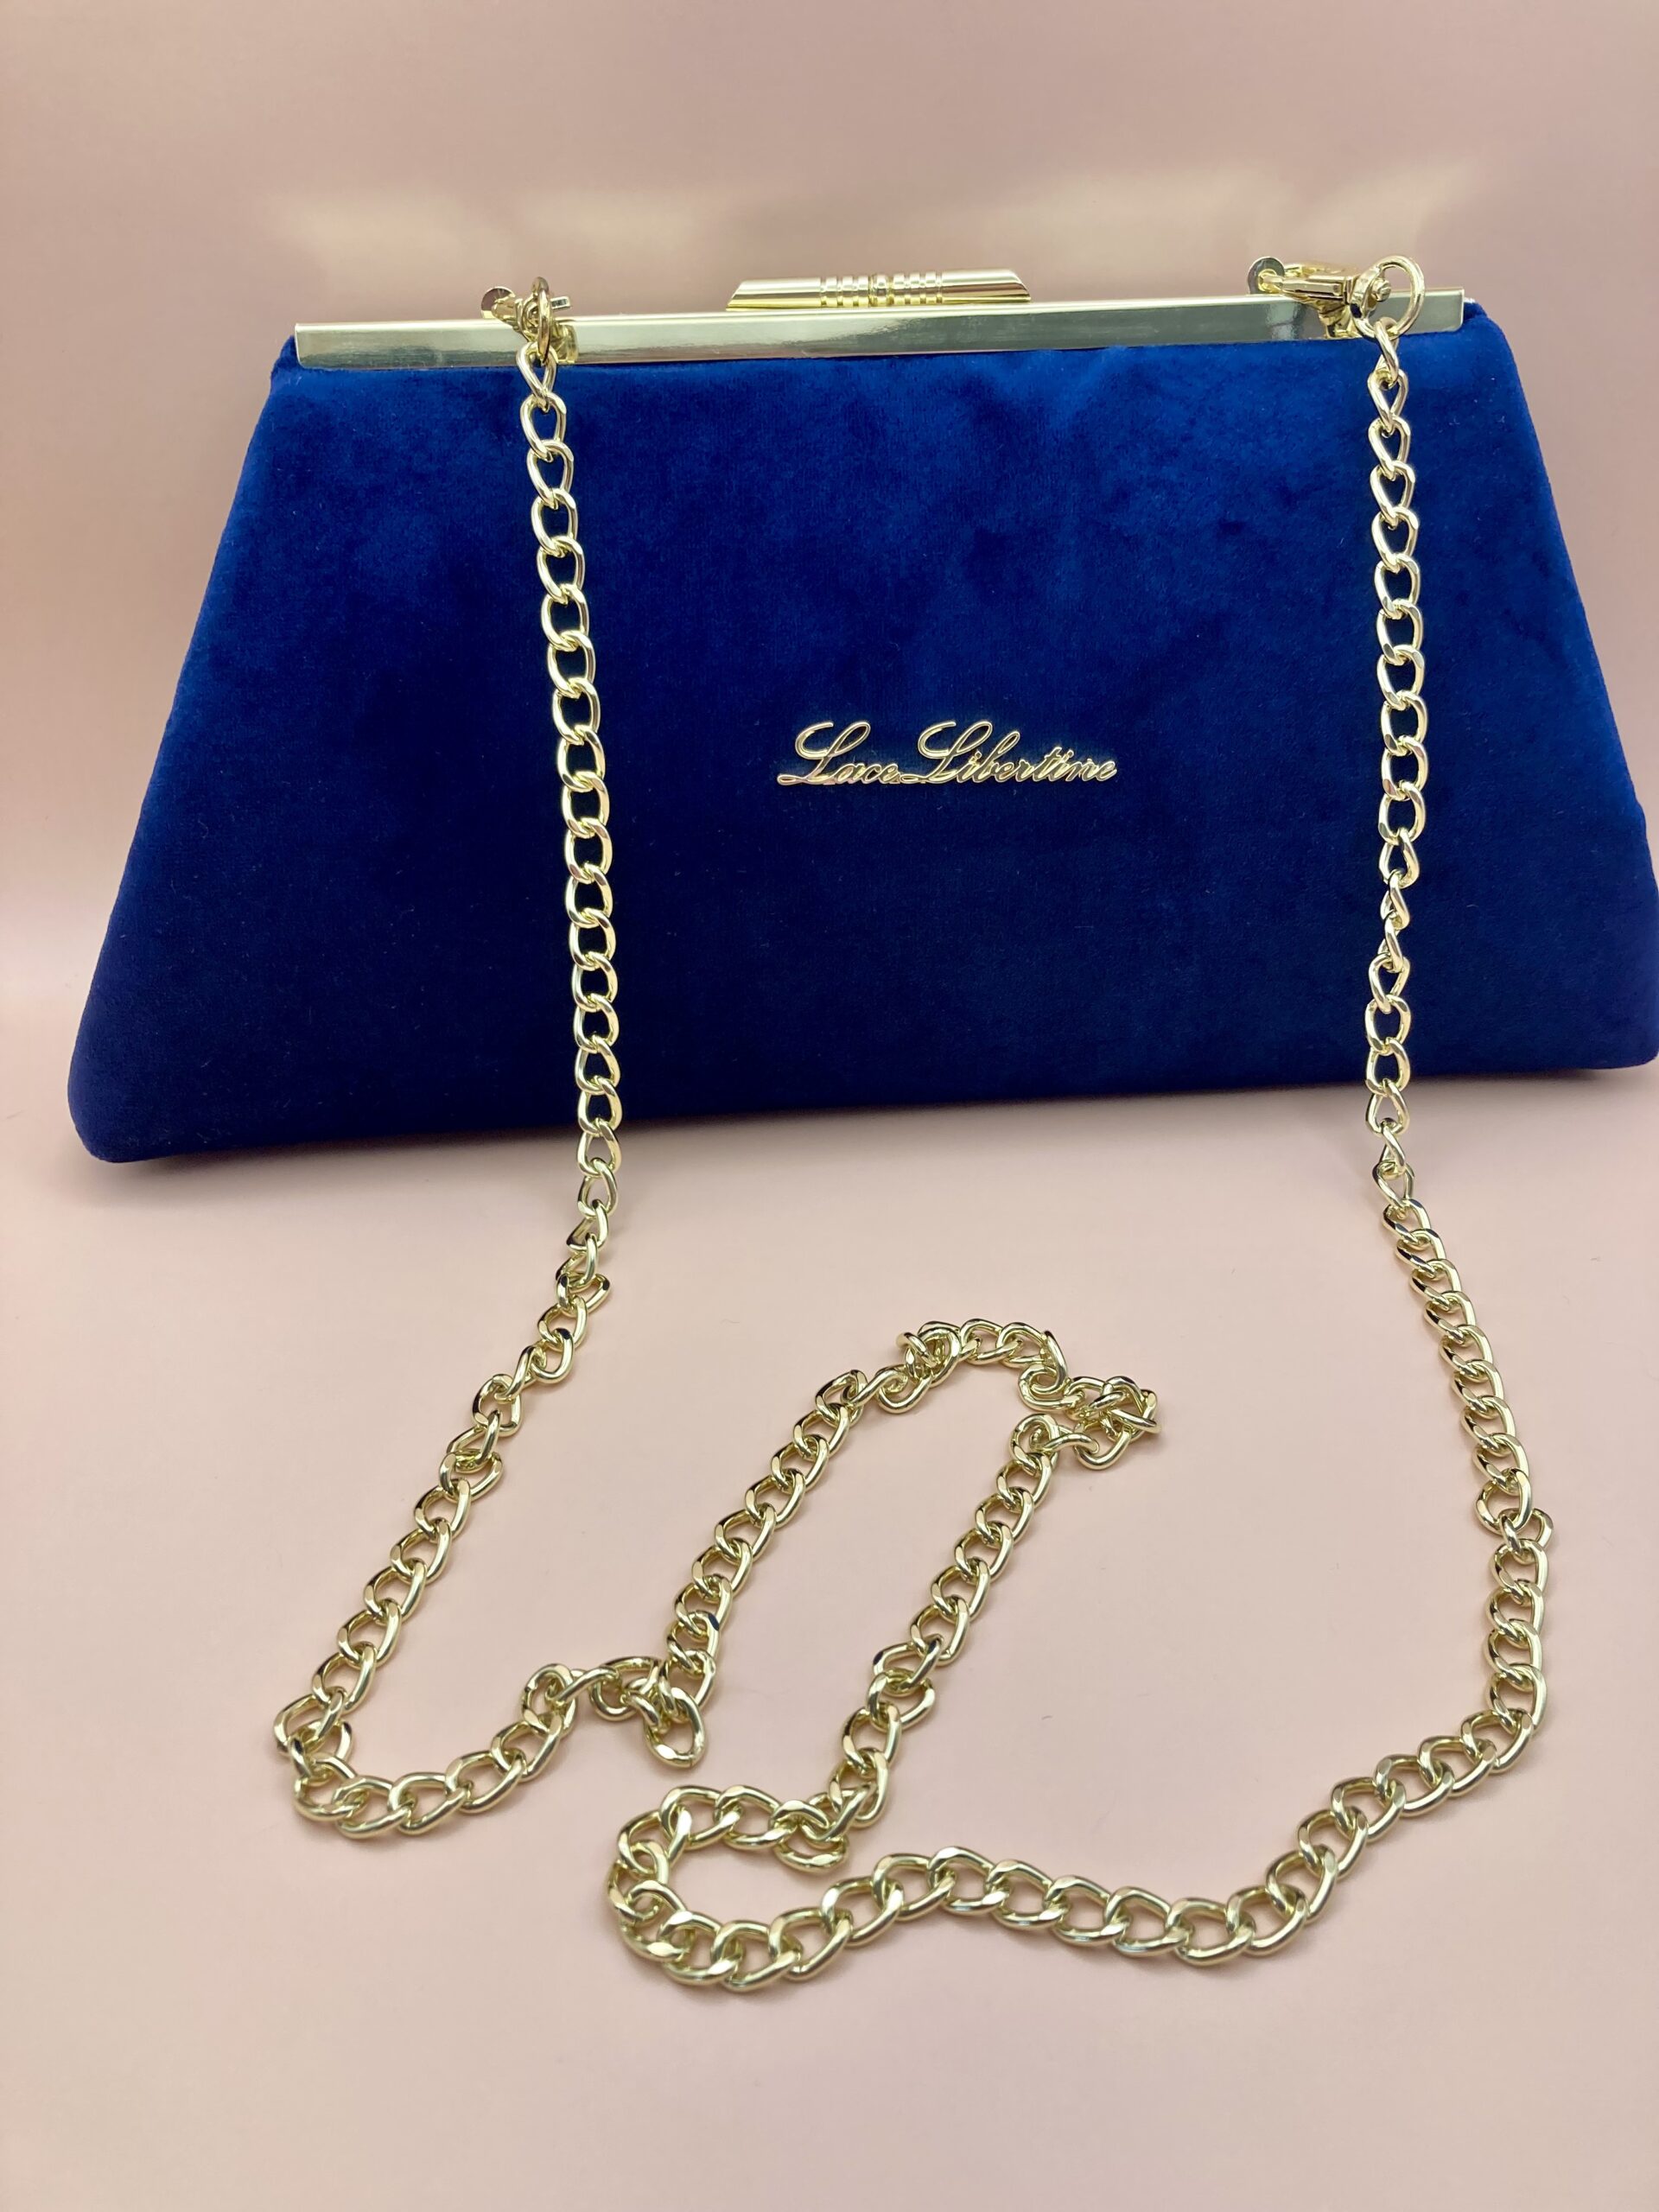 Party Wear Clutch Women's And Girl's Sequence Handbag Royal Blue With  Golden Sling - Everlasting Memories